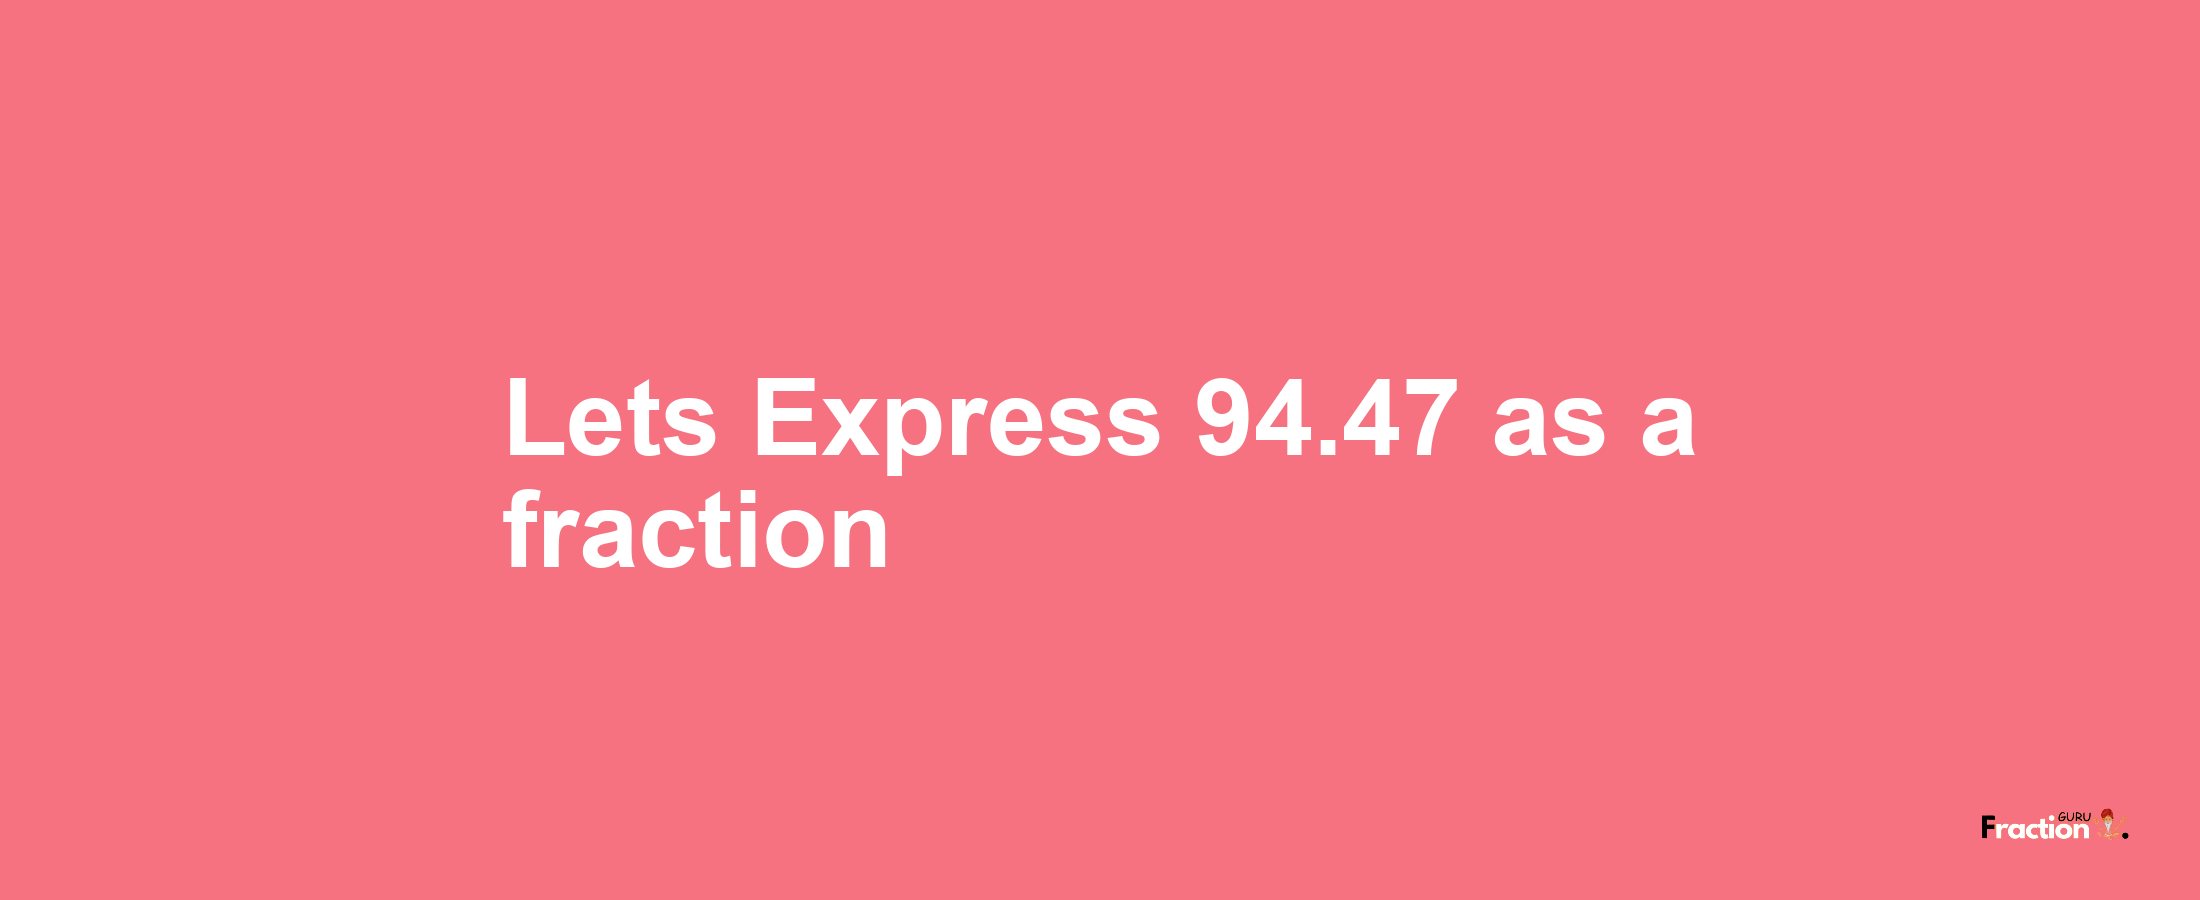 Lets Express 94.47 as afraction